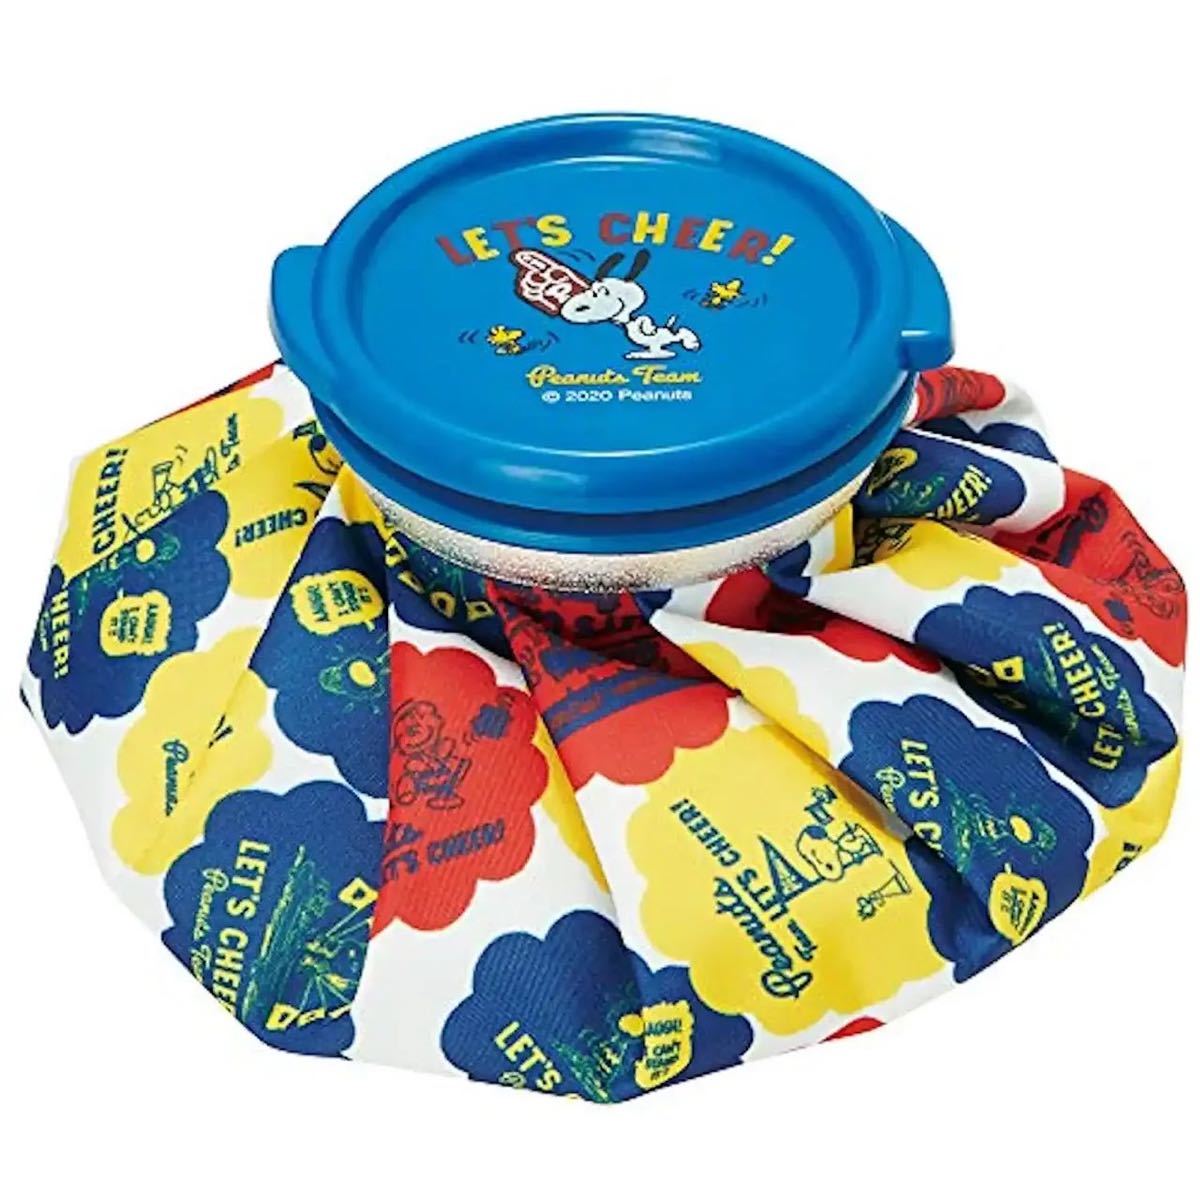  new goods Snoopy ice. . ice bag part . motion part icing * raise of temperature . middle . measures SNOOPY